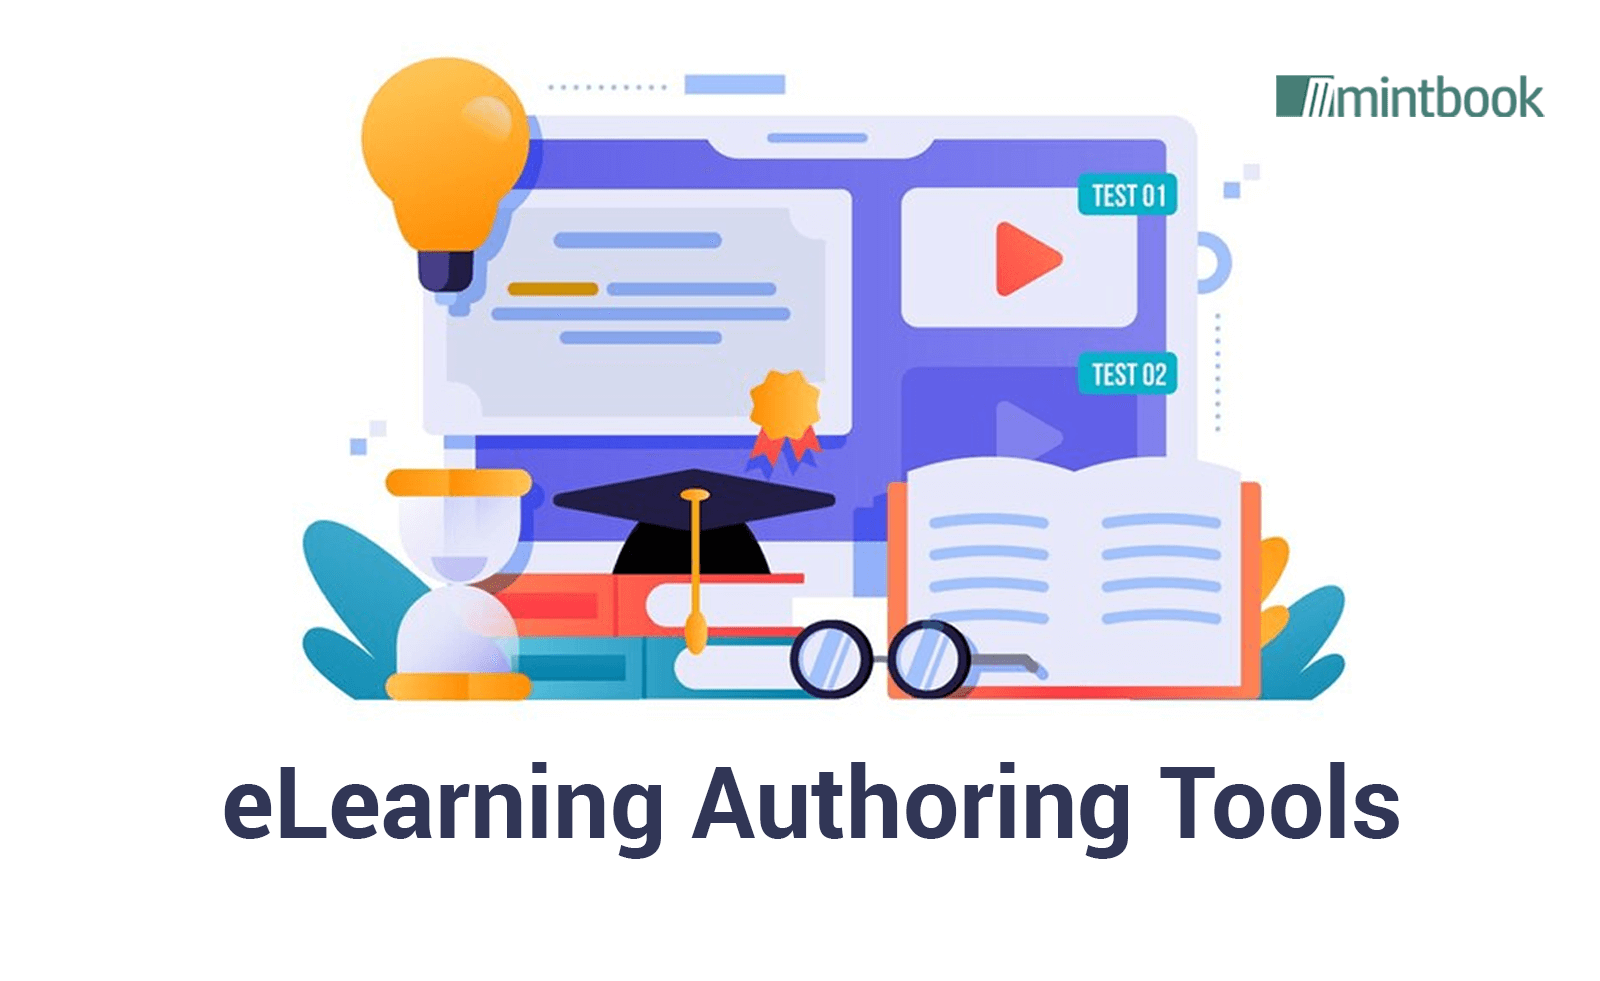 e-Learning Authoring Tools